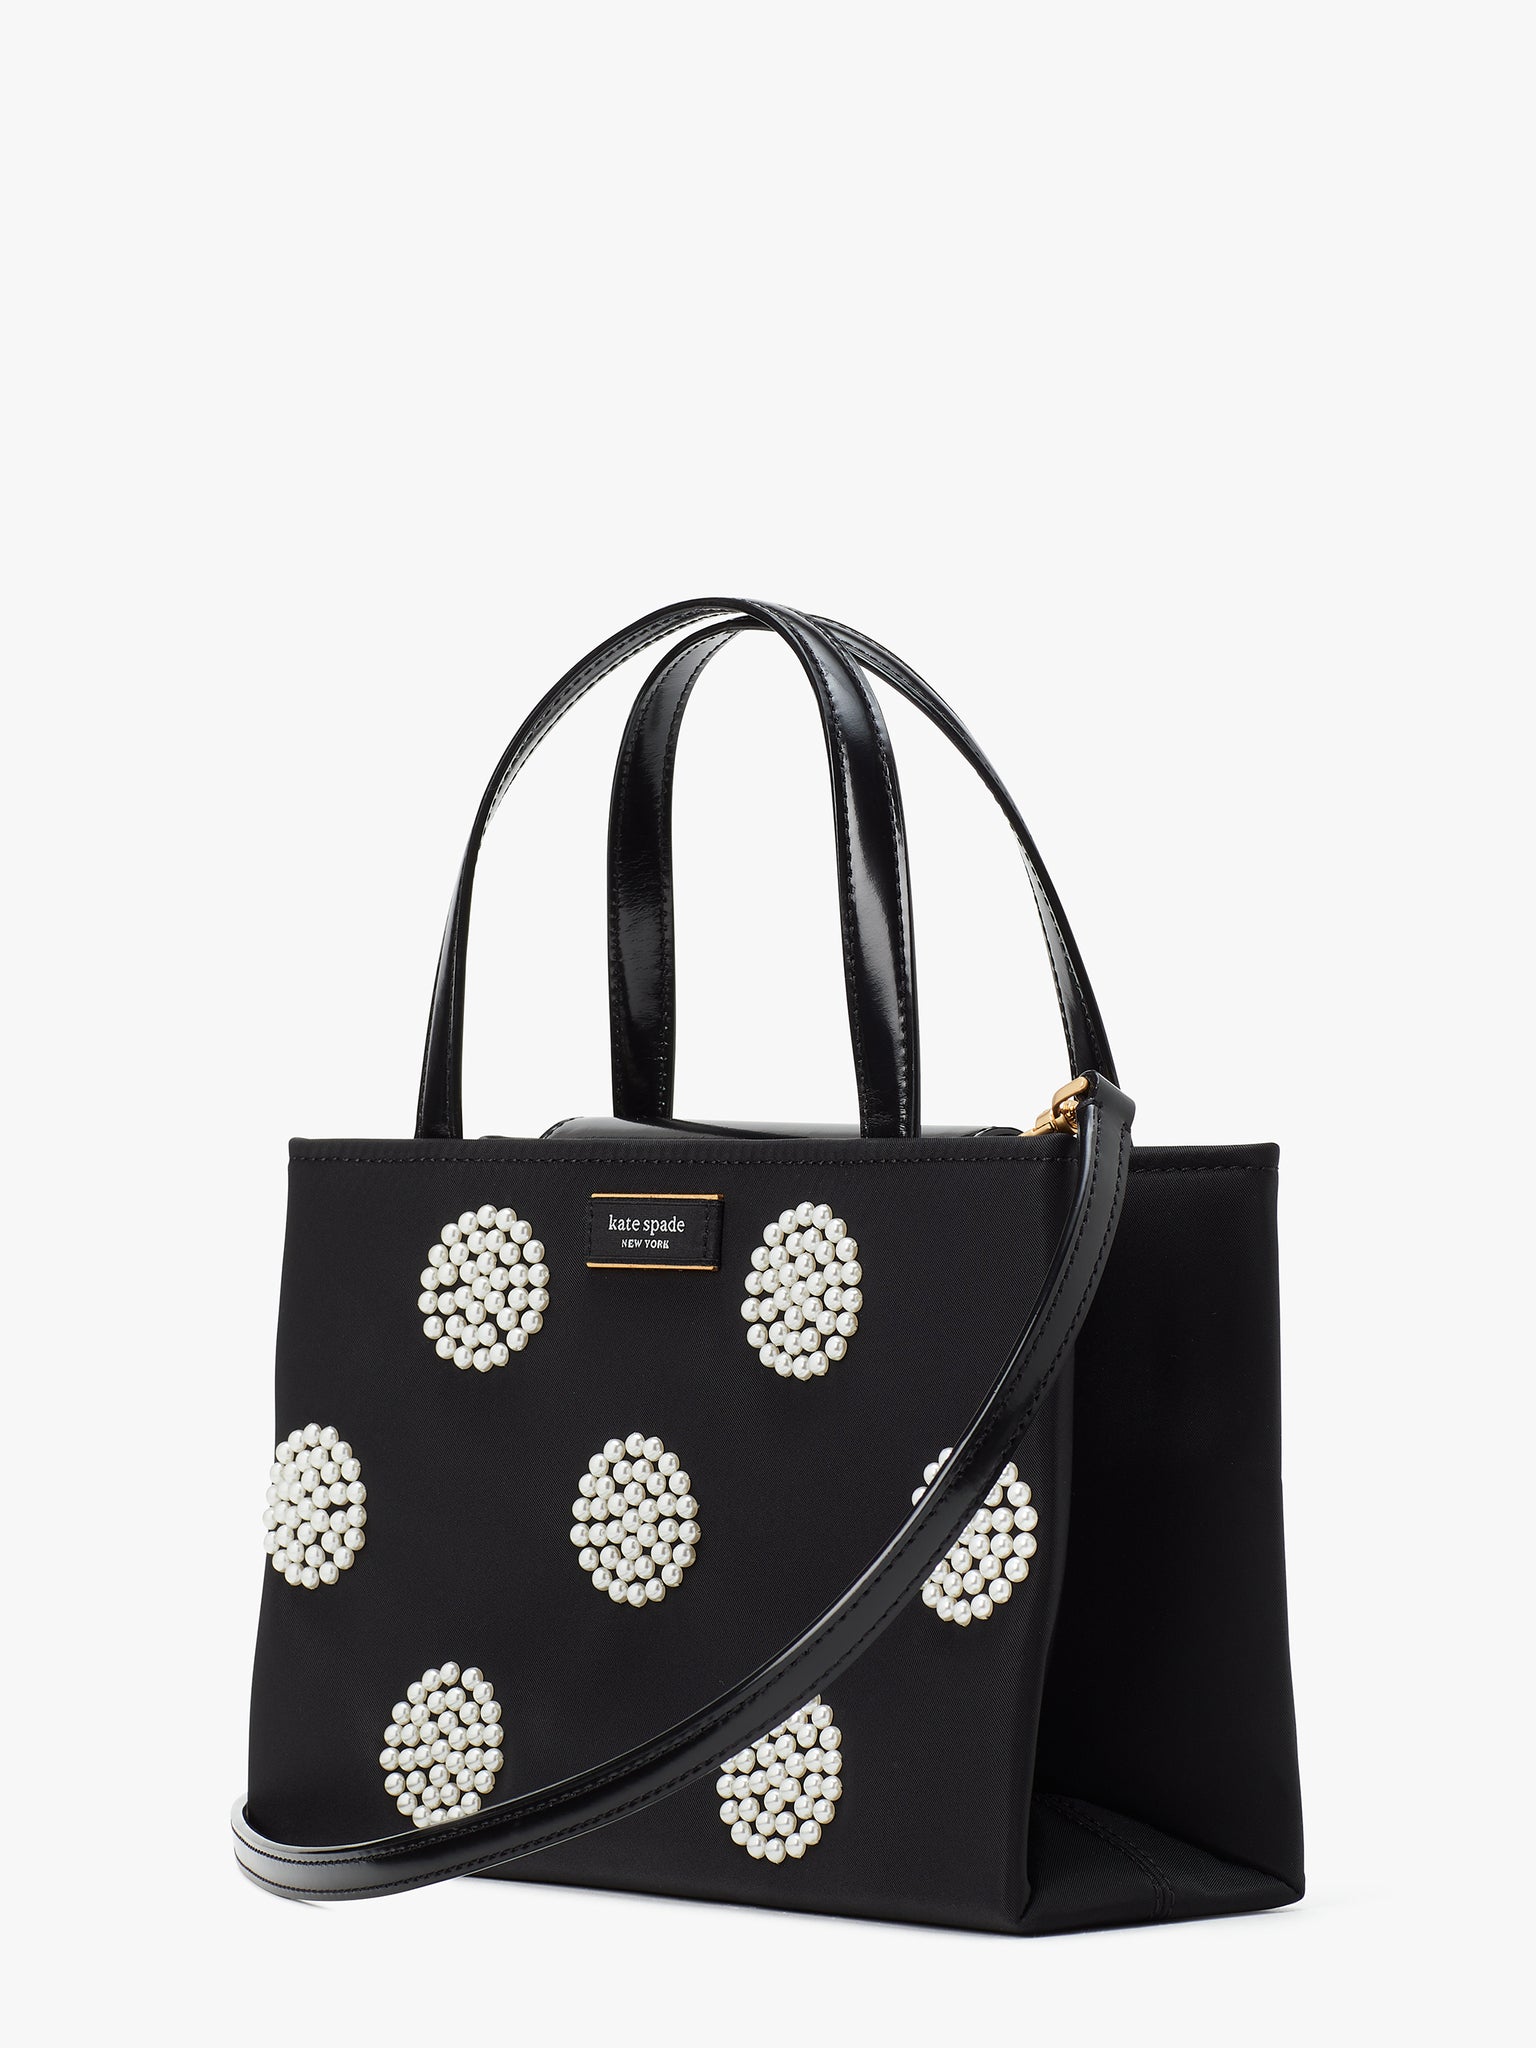 Kate Spade New York Small Sam Icon Leather Tote Bag Black